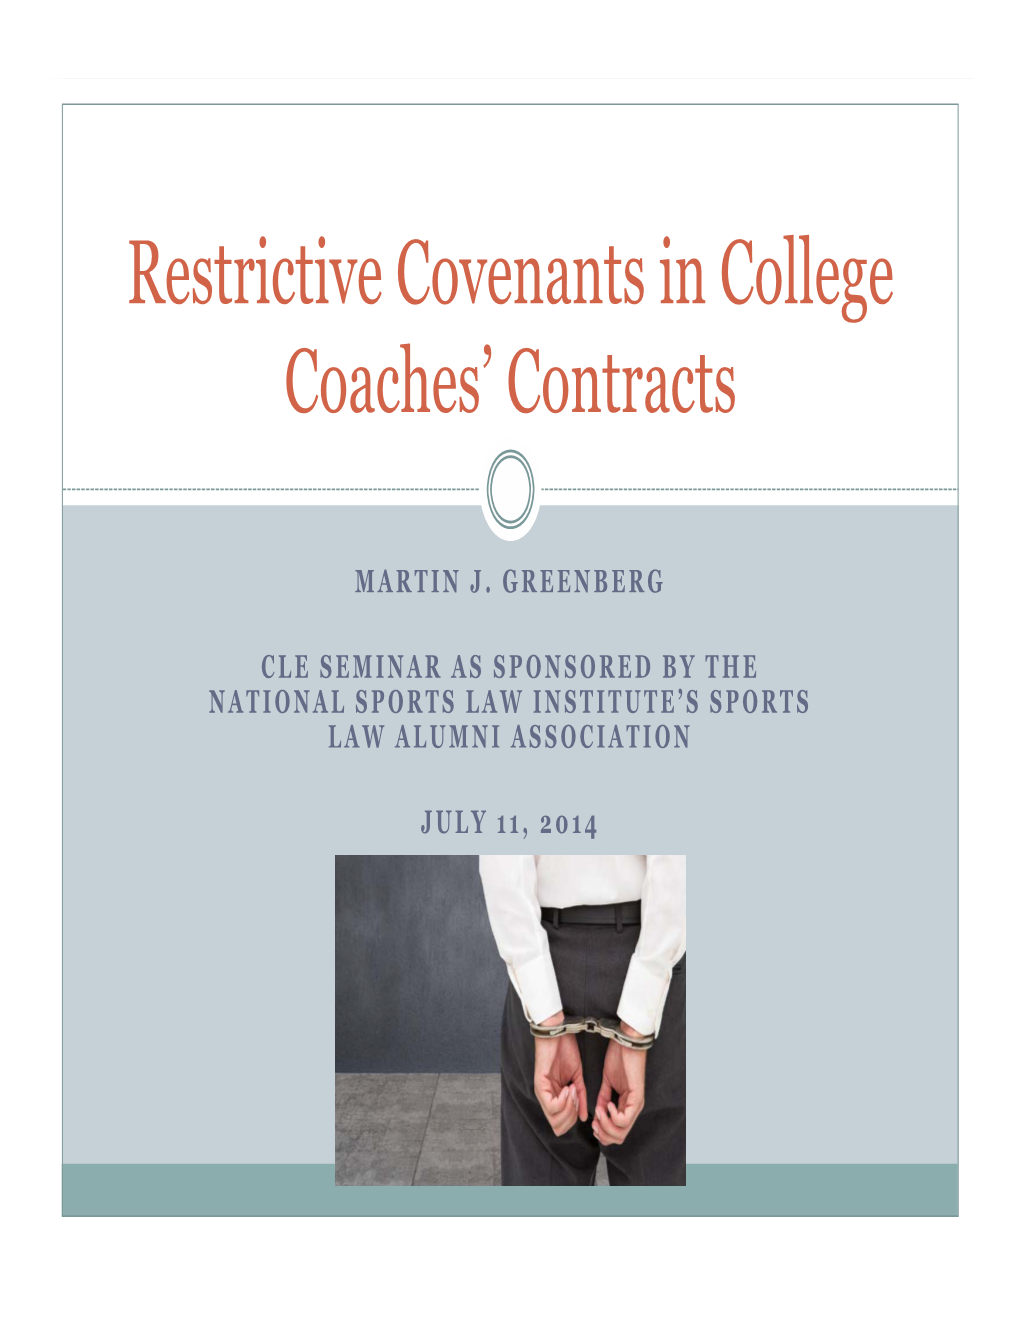 Restrictive Covenants in College Coaches' Contracts